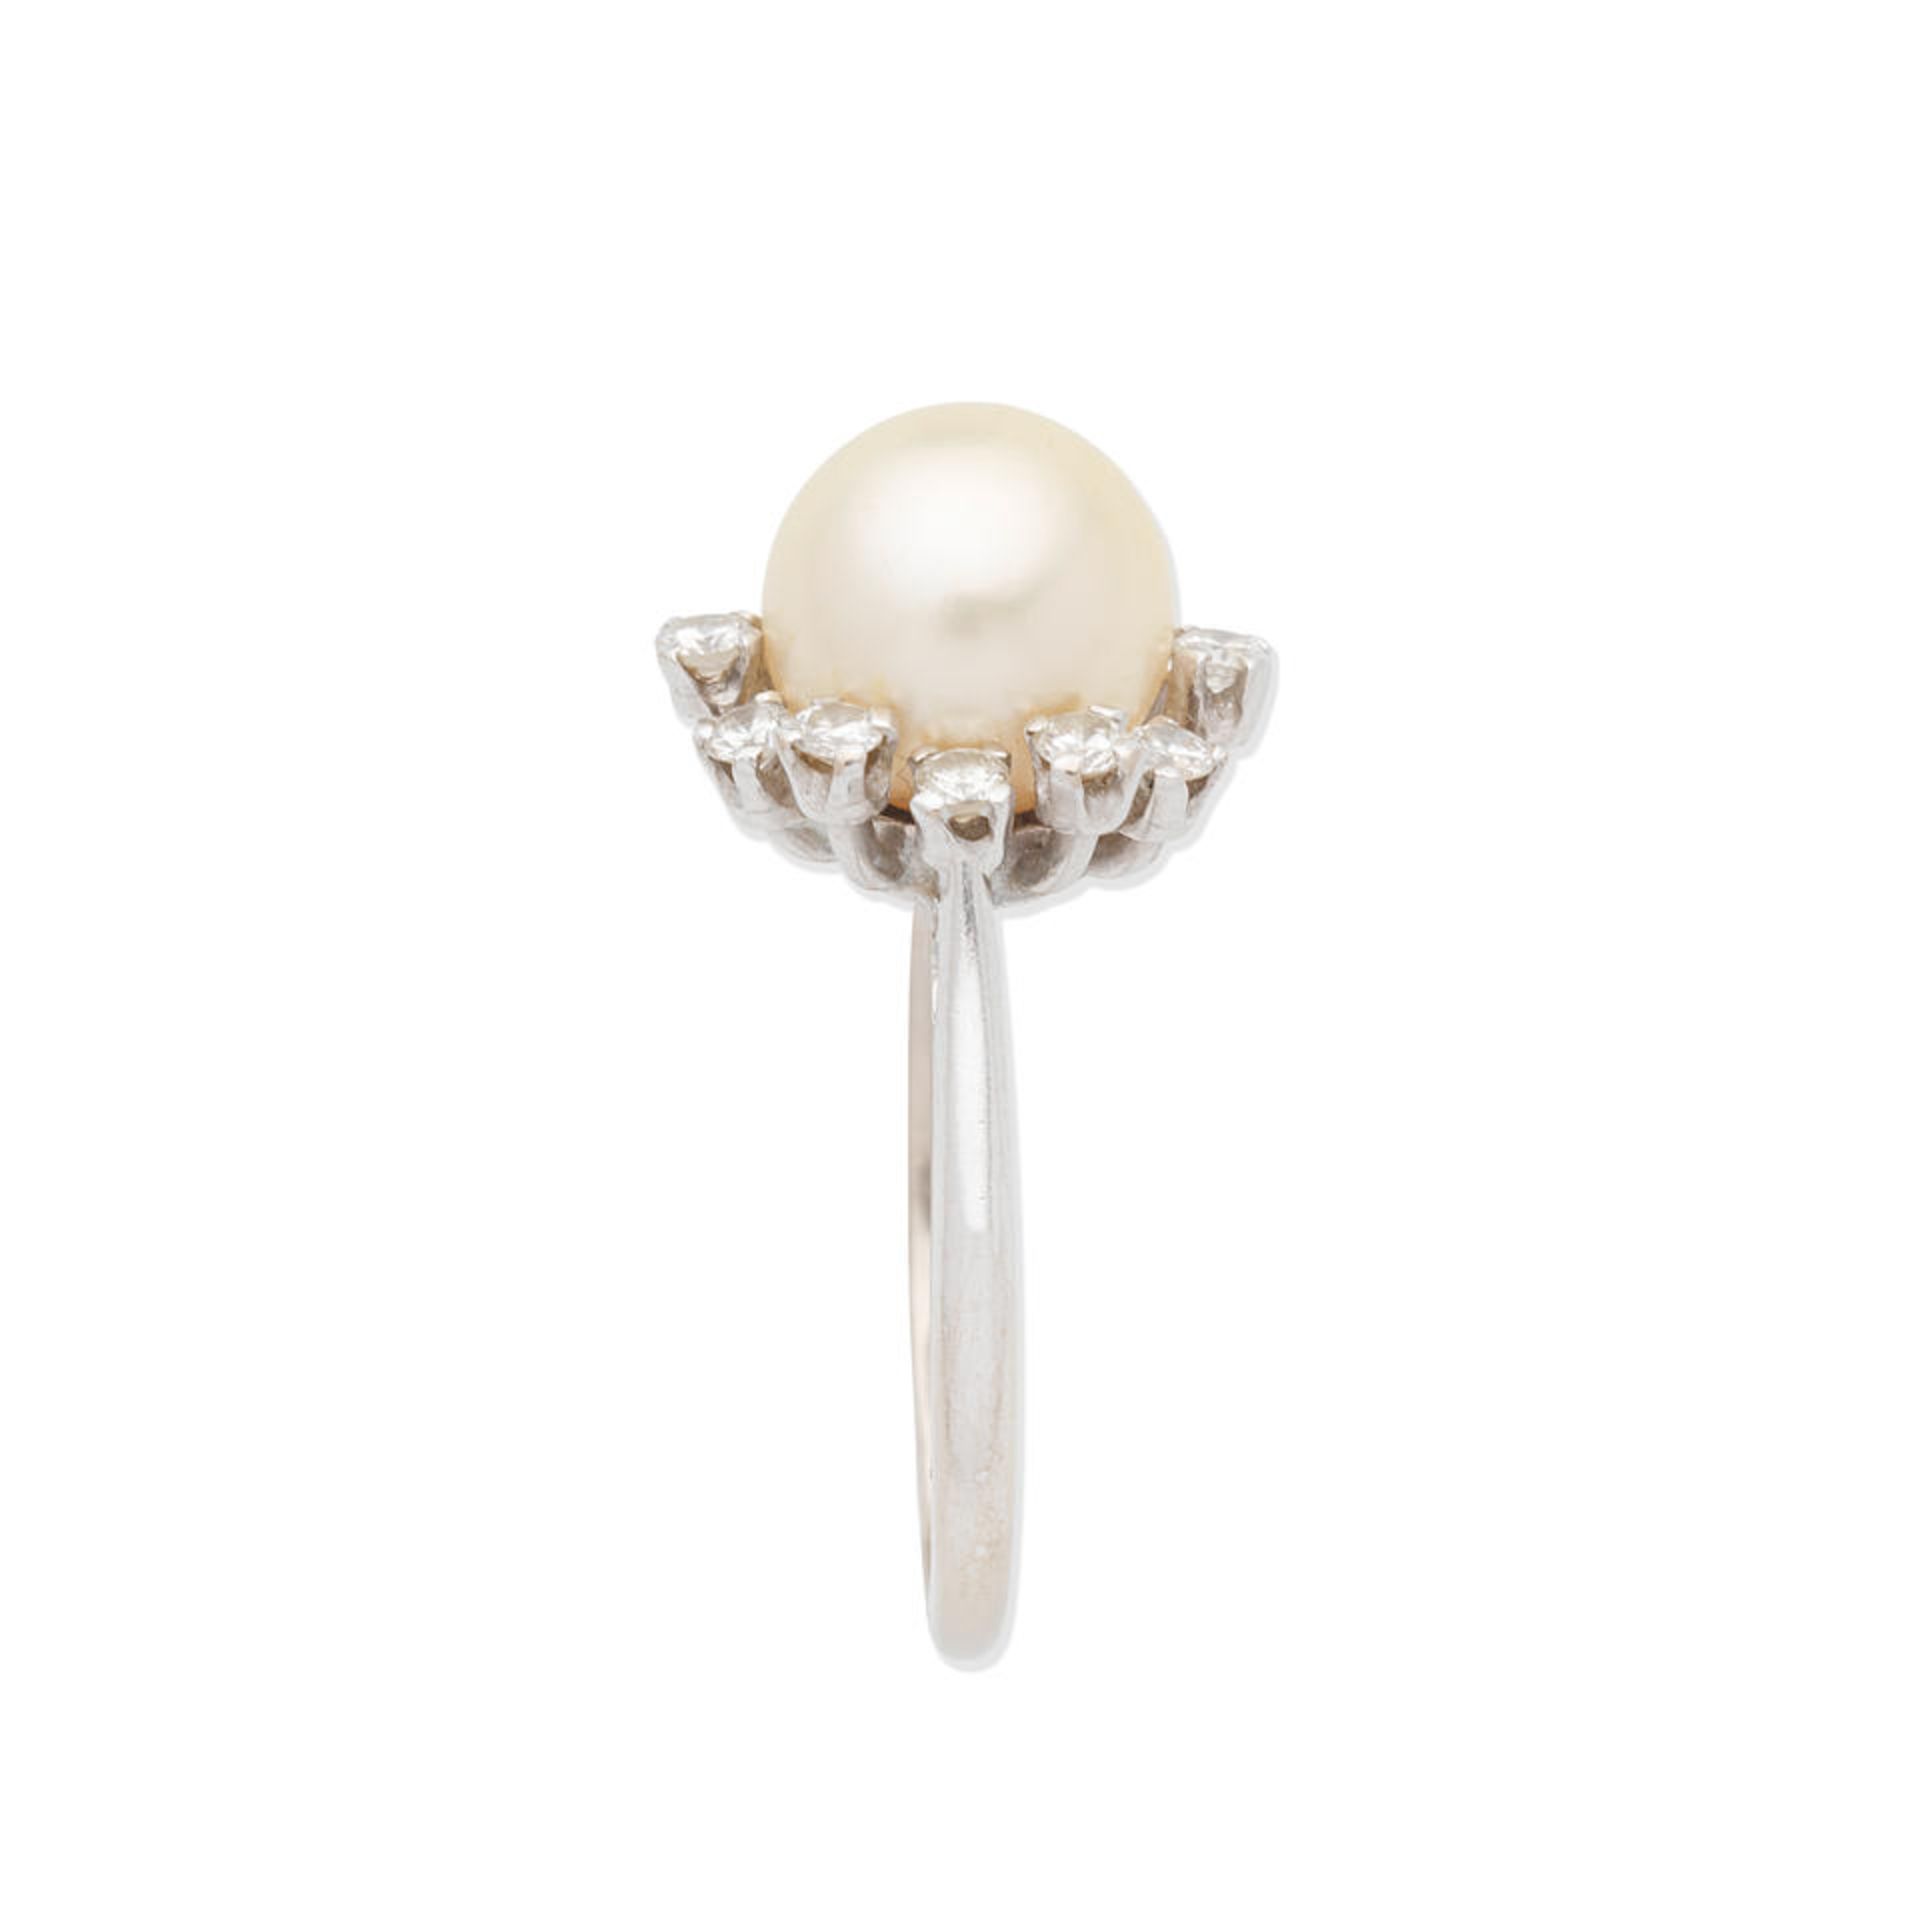 ASPREY: CULTURED PEARL AND DIAMOND RING - Image 3 of 3